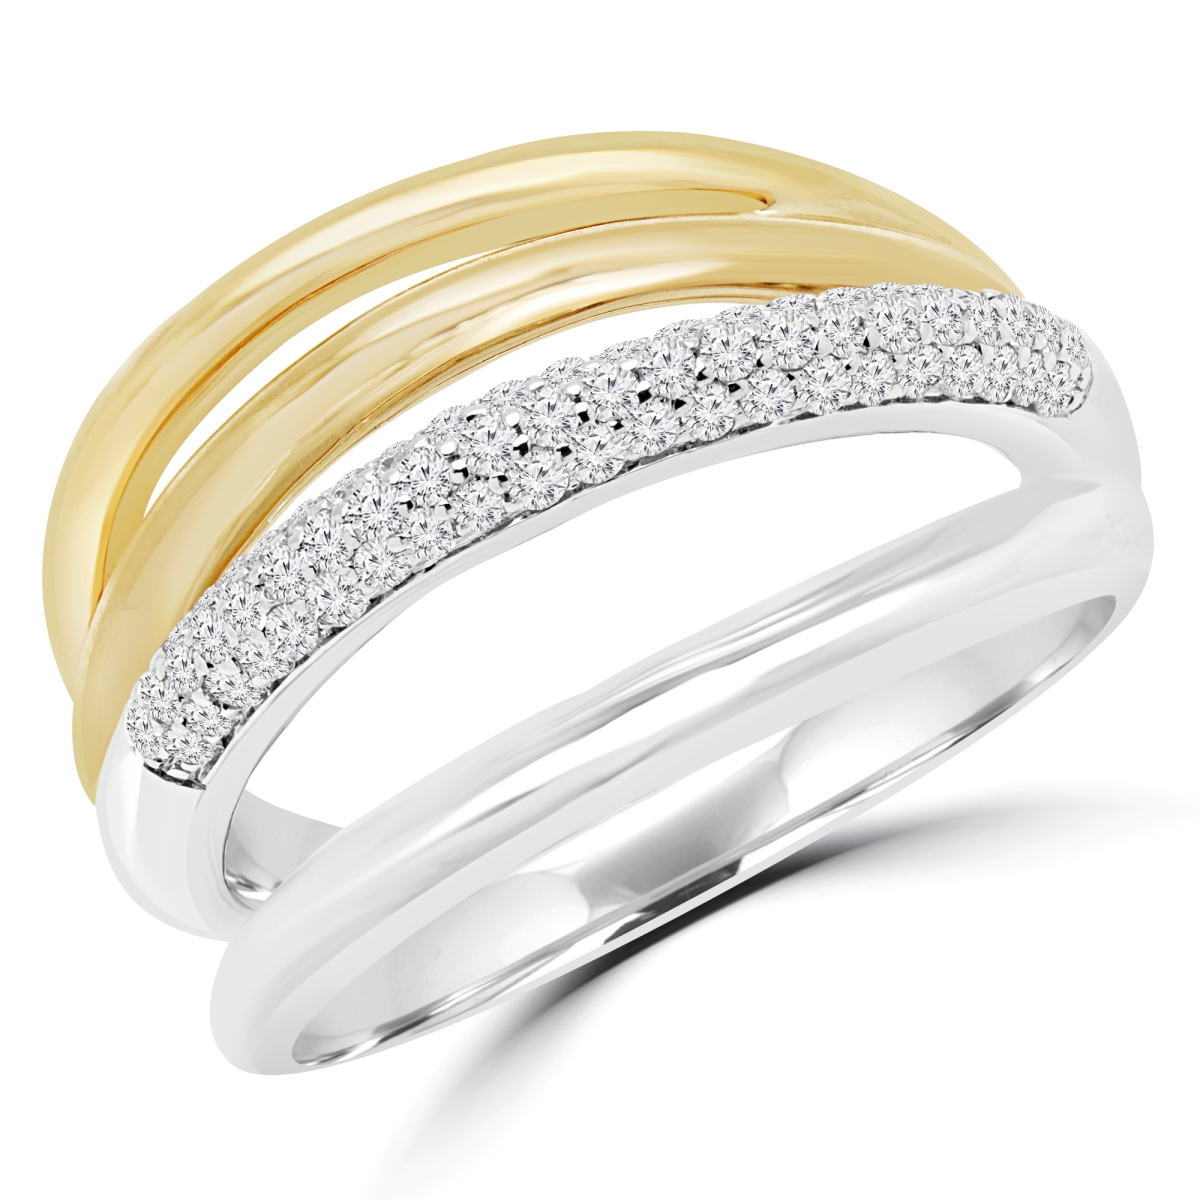 Picture of Majesty Diamonds MDR170050-7.75 0.37 CTW Round Diamond Cocktail Semi-Eternity Ring in 14K Two-Tone Gold - 7.75